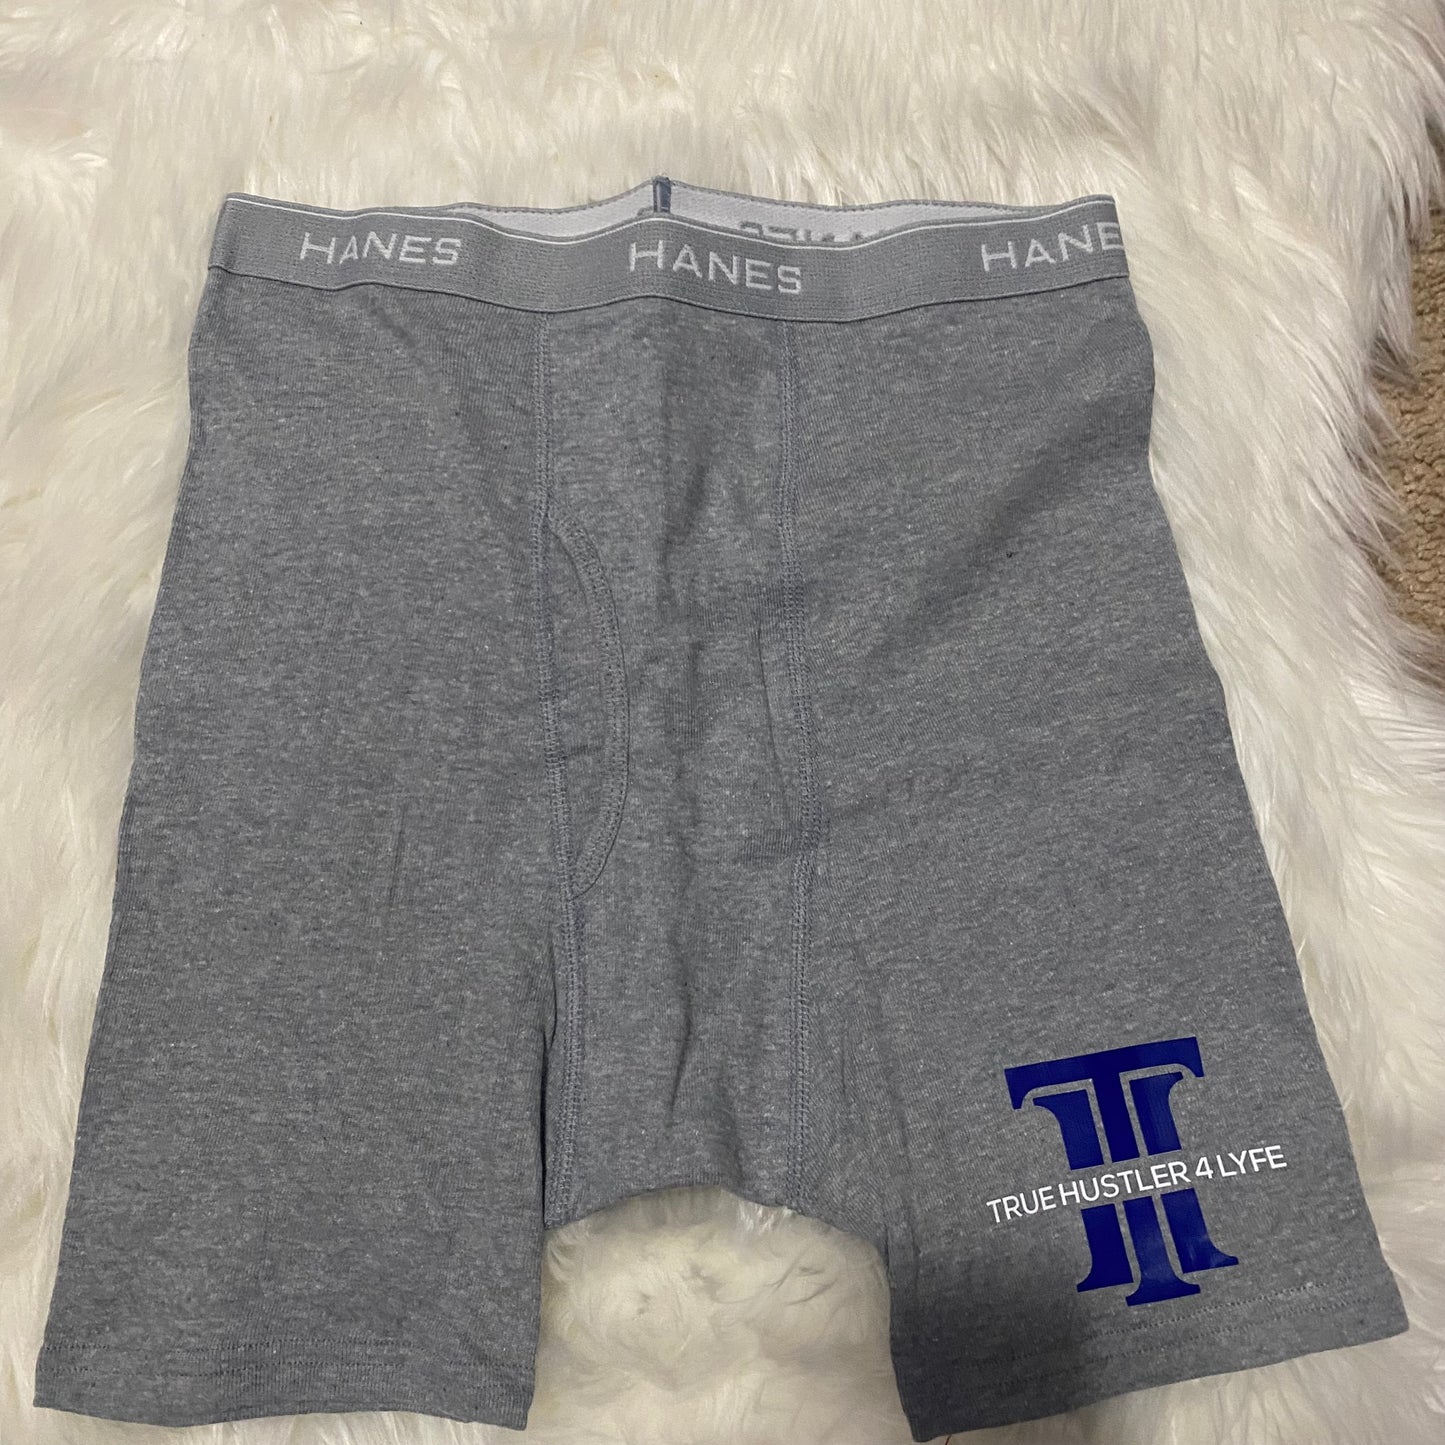 Upgrade Your Style: Men's Light Grey Boxer Briefs and White T-Shirt Set with Blue Logo